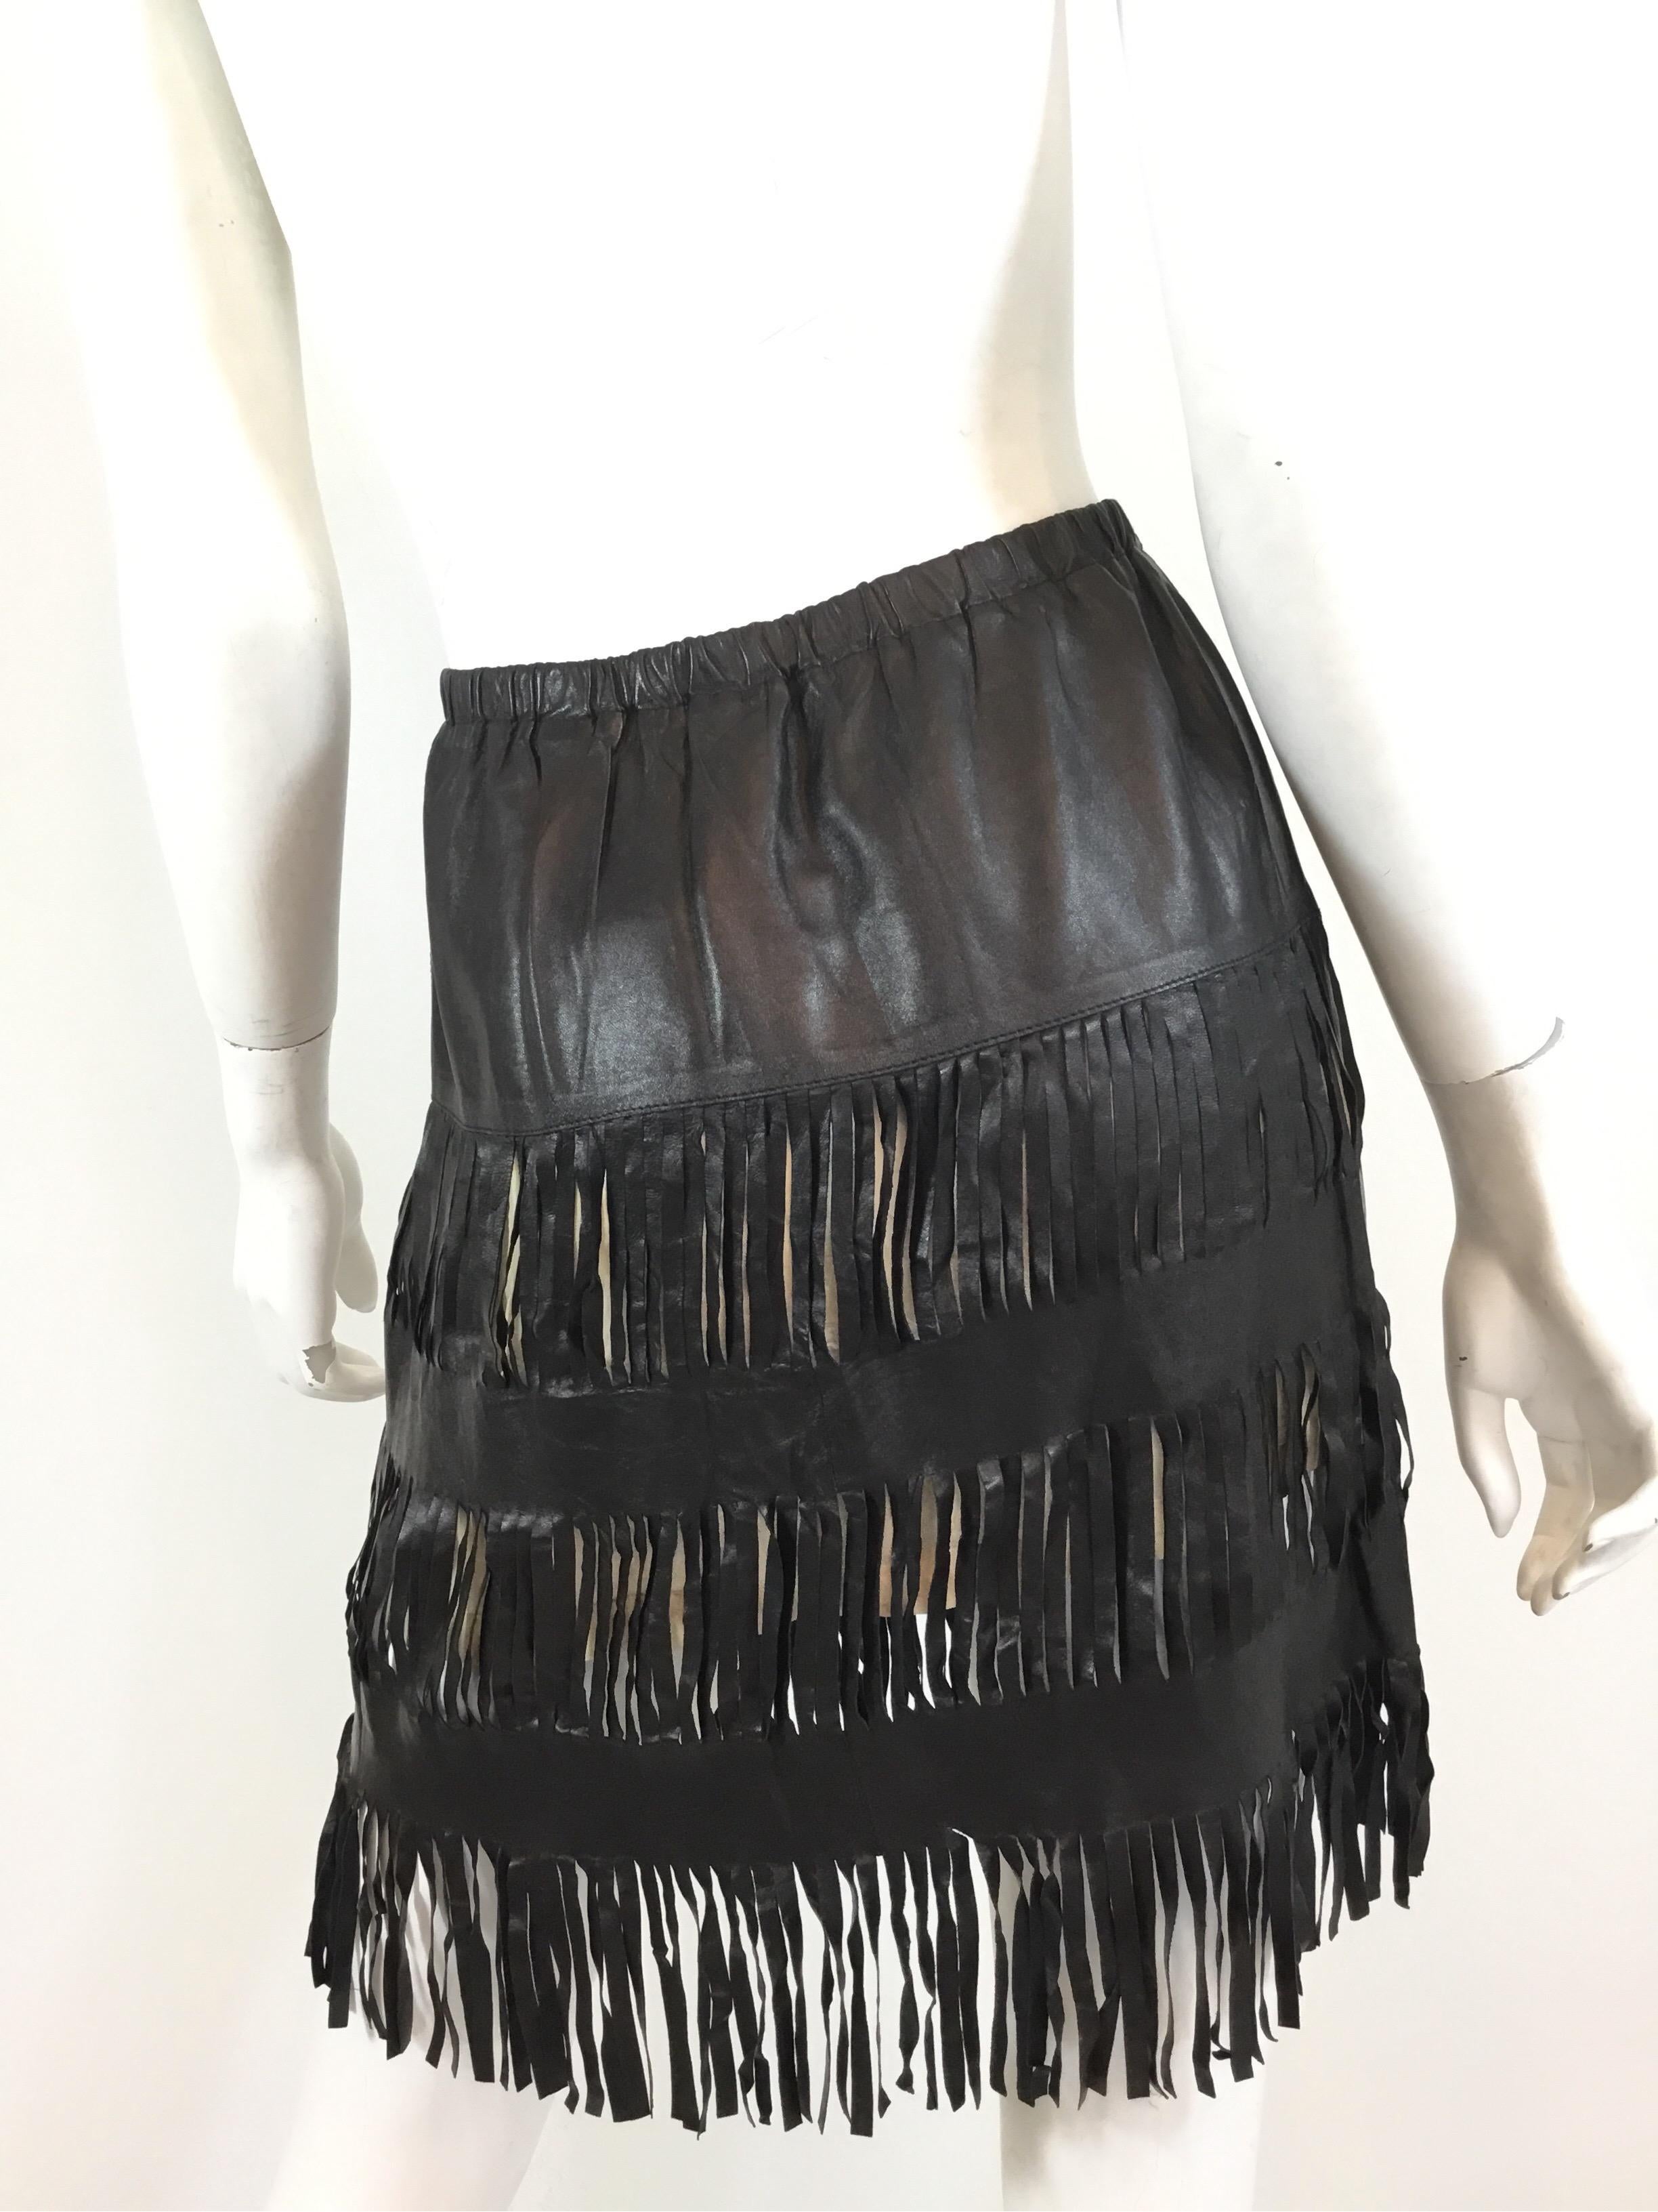 Tom Ford for Gucci Leather Fringe Skirt SS Runaway 1999 In Excellent Condition In Carmel, CA